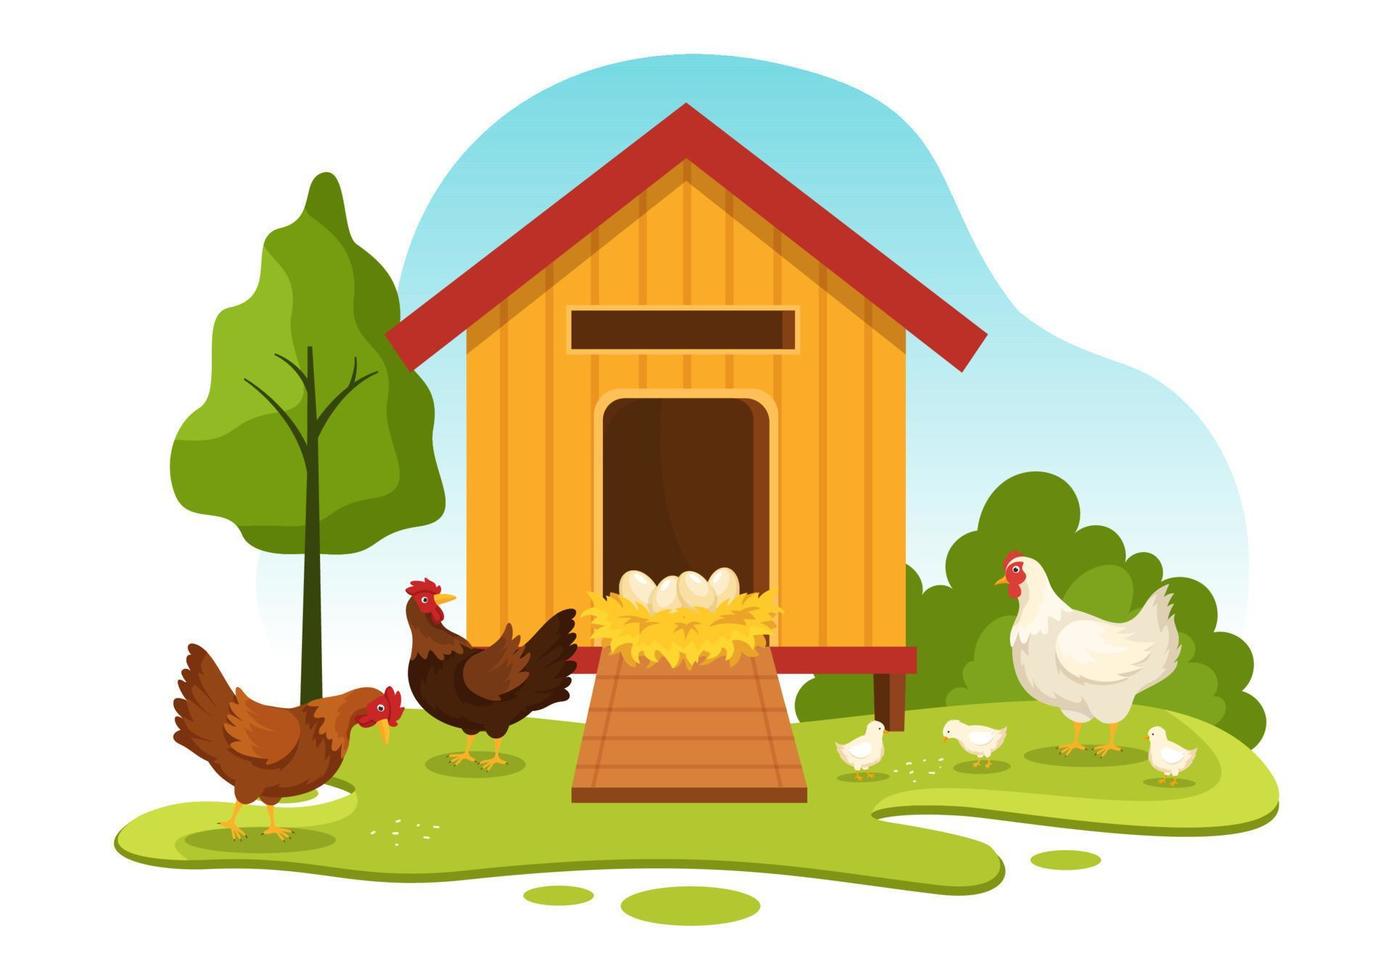 Poultry Farming with Farmer, Cage, Chicken and Egg Farm on Green Field Background View in Hand Drawn Cute Cartoon Template Illustration vector